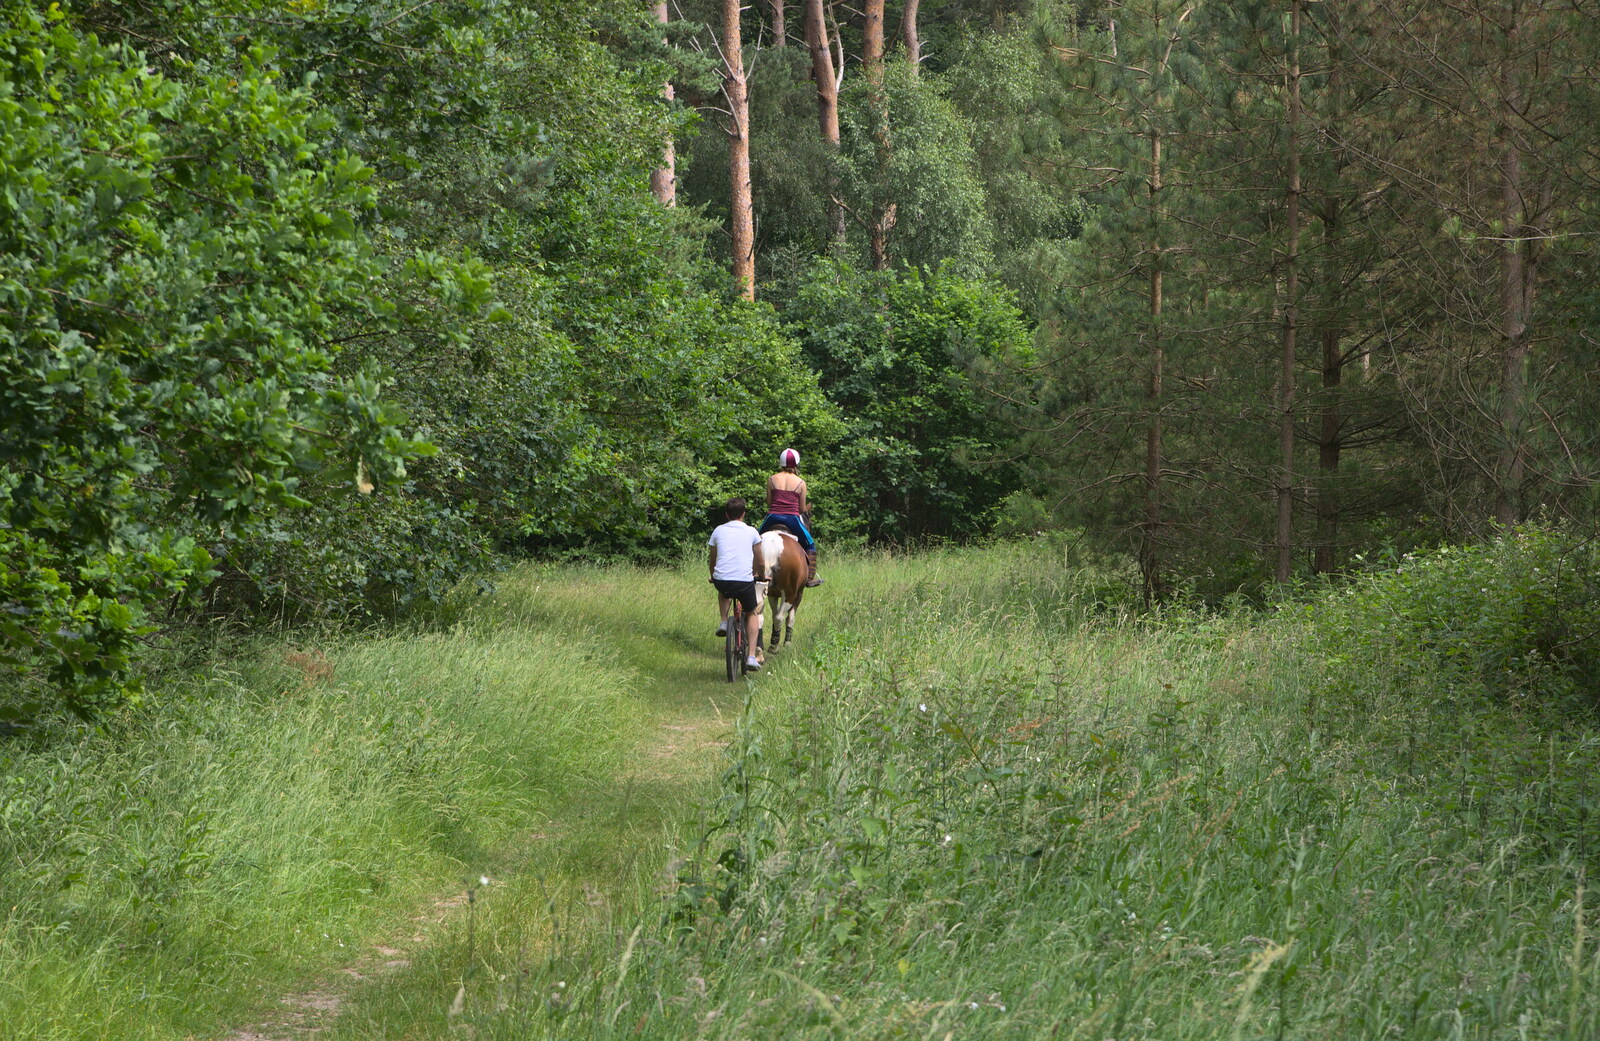 A bicycle and pony in the woods from A Weekend in the Camper Van, West Harling, Norfolk - 21st June 2014